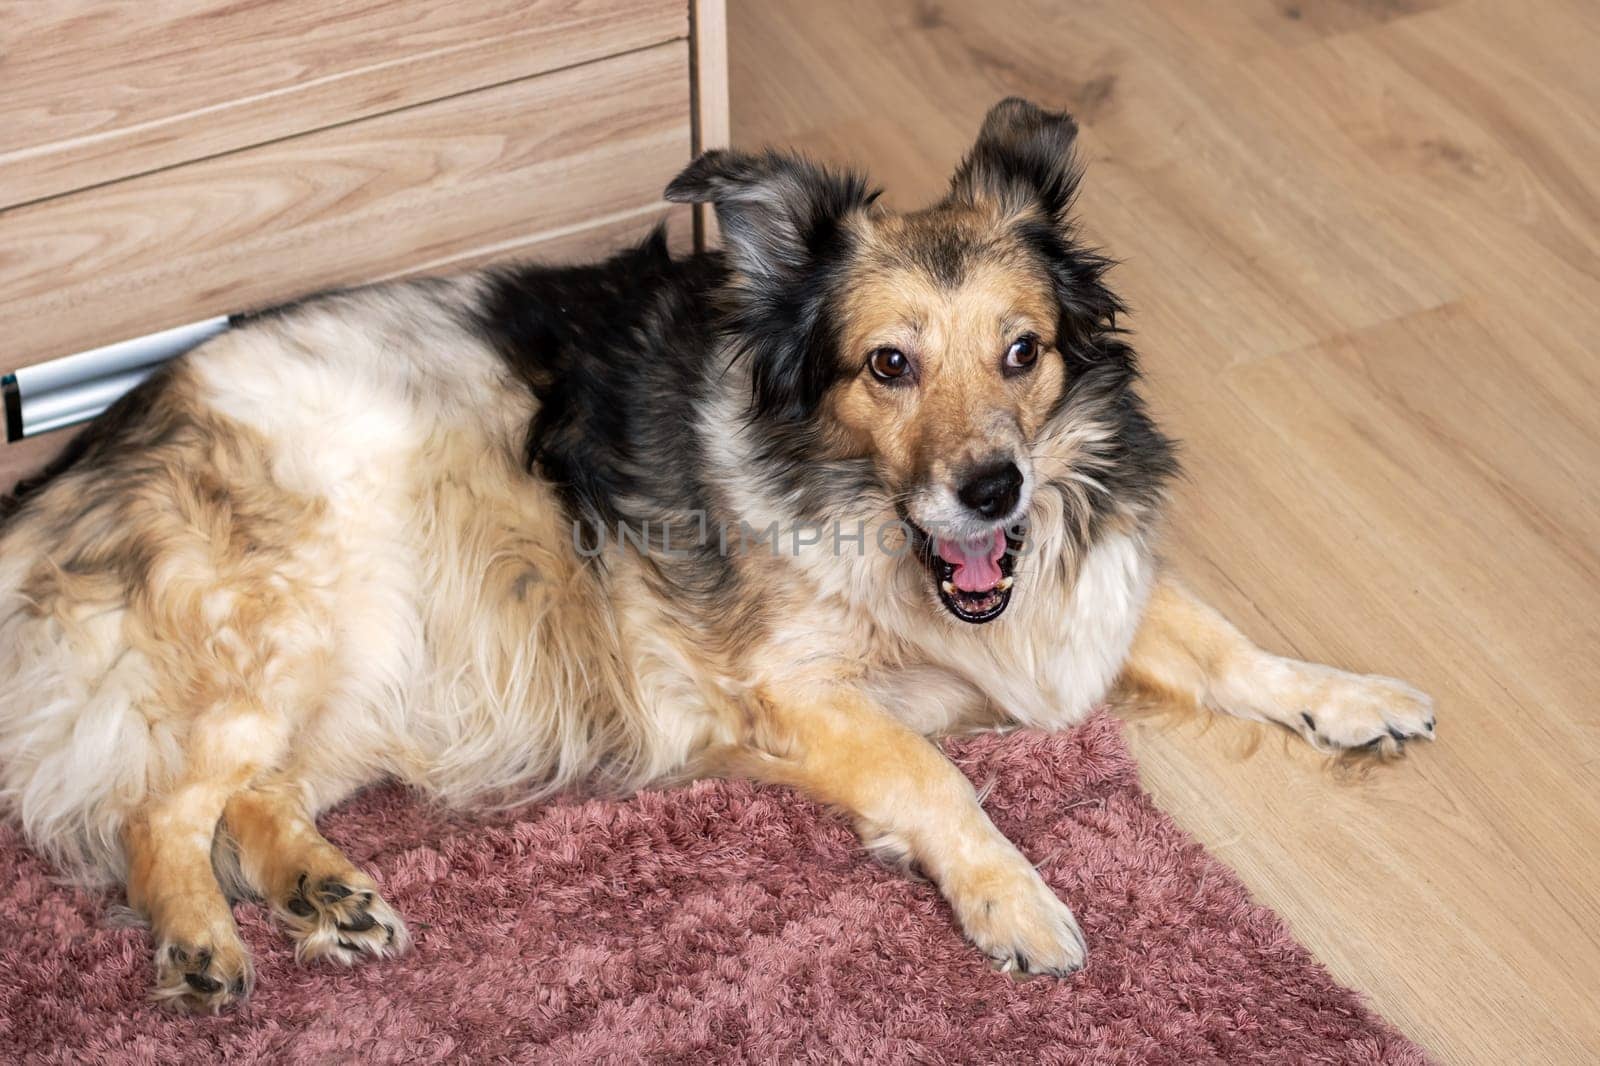 A Herding dog, known for its loyalty and companionship, lies on a hardwood rug with its mouth open. The dogs fur shines under the wood stain, creating a cozy scene in the event